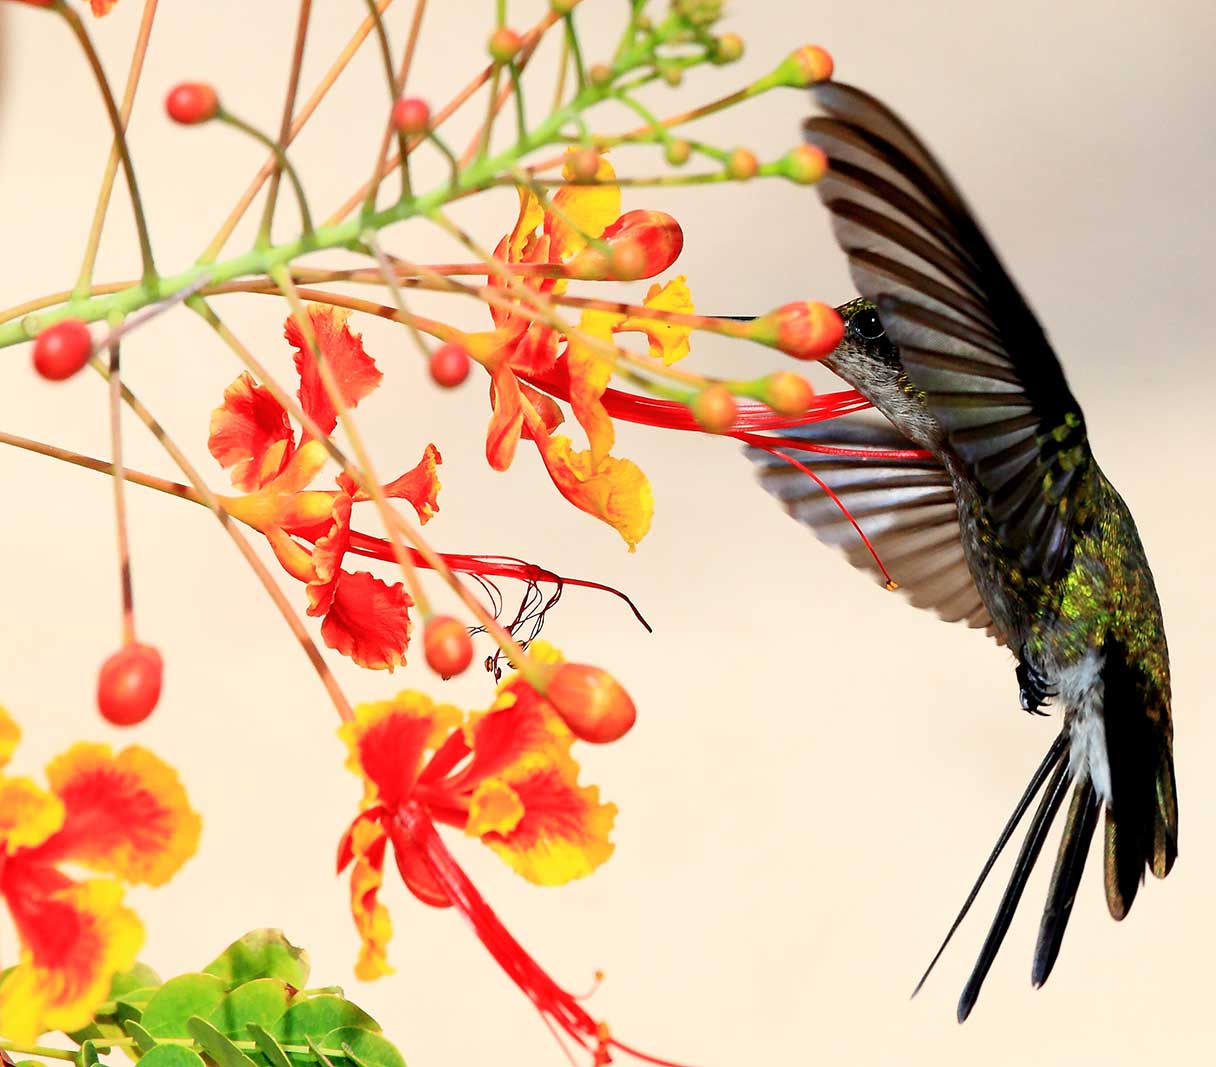 Hummingbirds (family Trochilidae) are amazingly adapted pollinators, and they play an important role in pollination. They have long, slender bills and tube-like tongues that they use to drink nectar from brightly-colored flowers